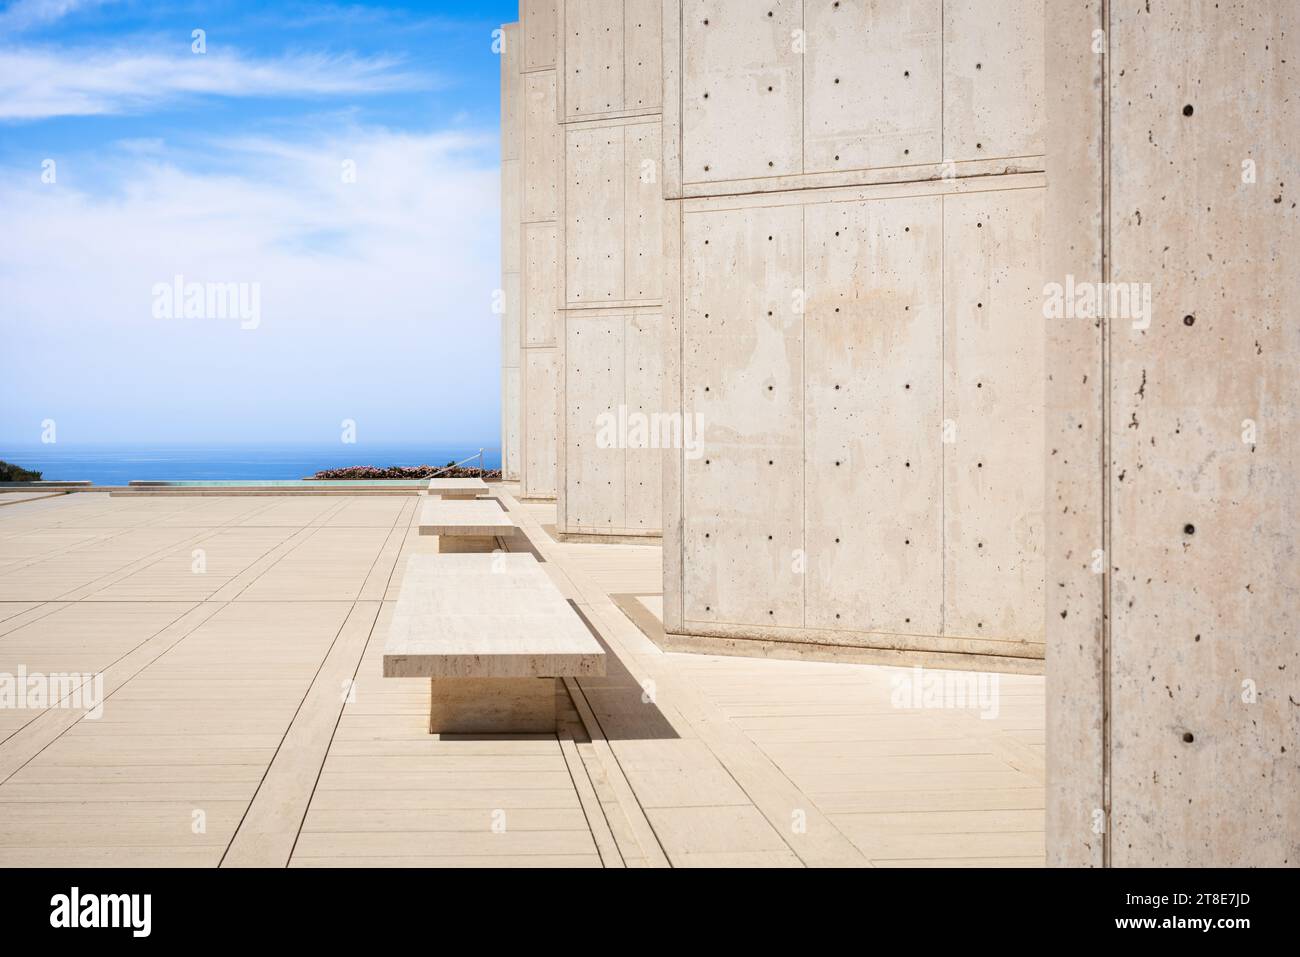 LA JOLLA, CALIFORNIA - FERUARY 27, 2016: The Salk Institute for Biological Studies. The institute was founded in 1960 by Jonas Salk, the developer of Stock Photo